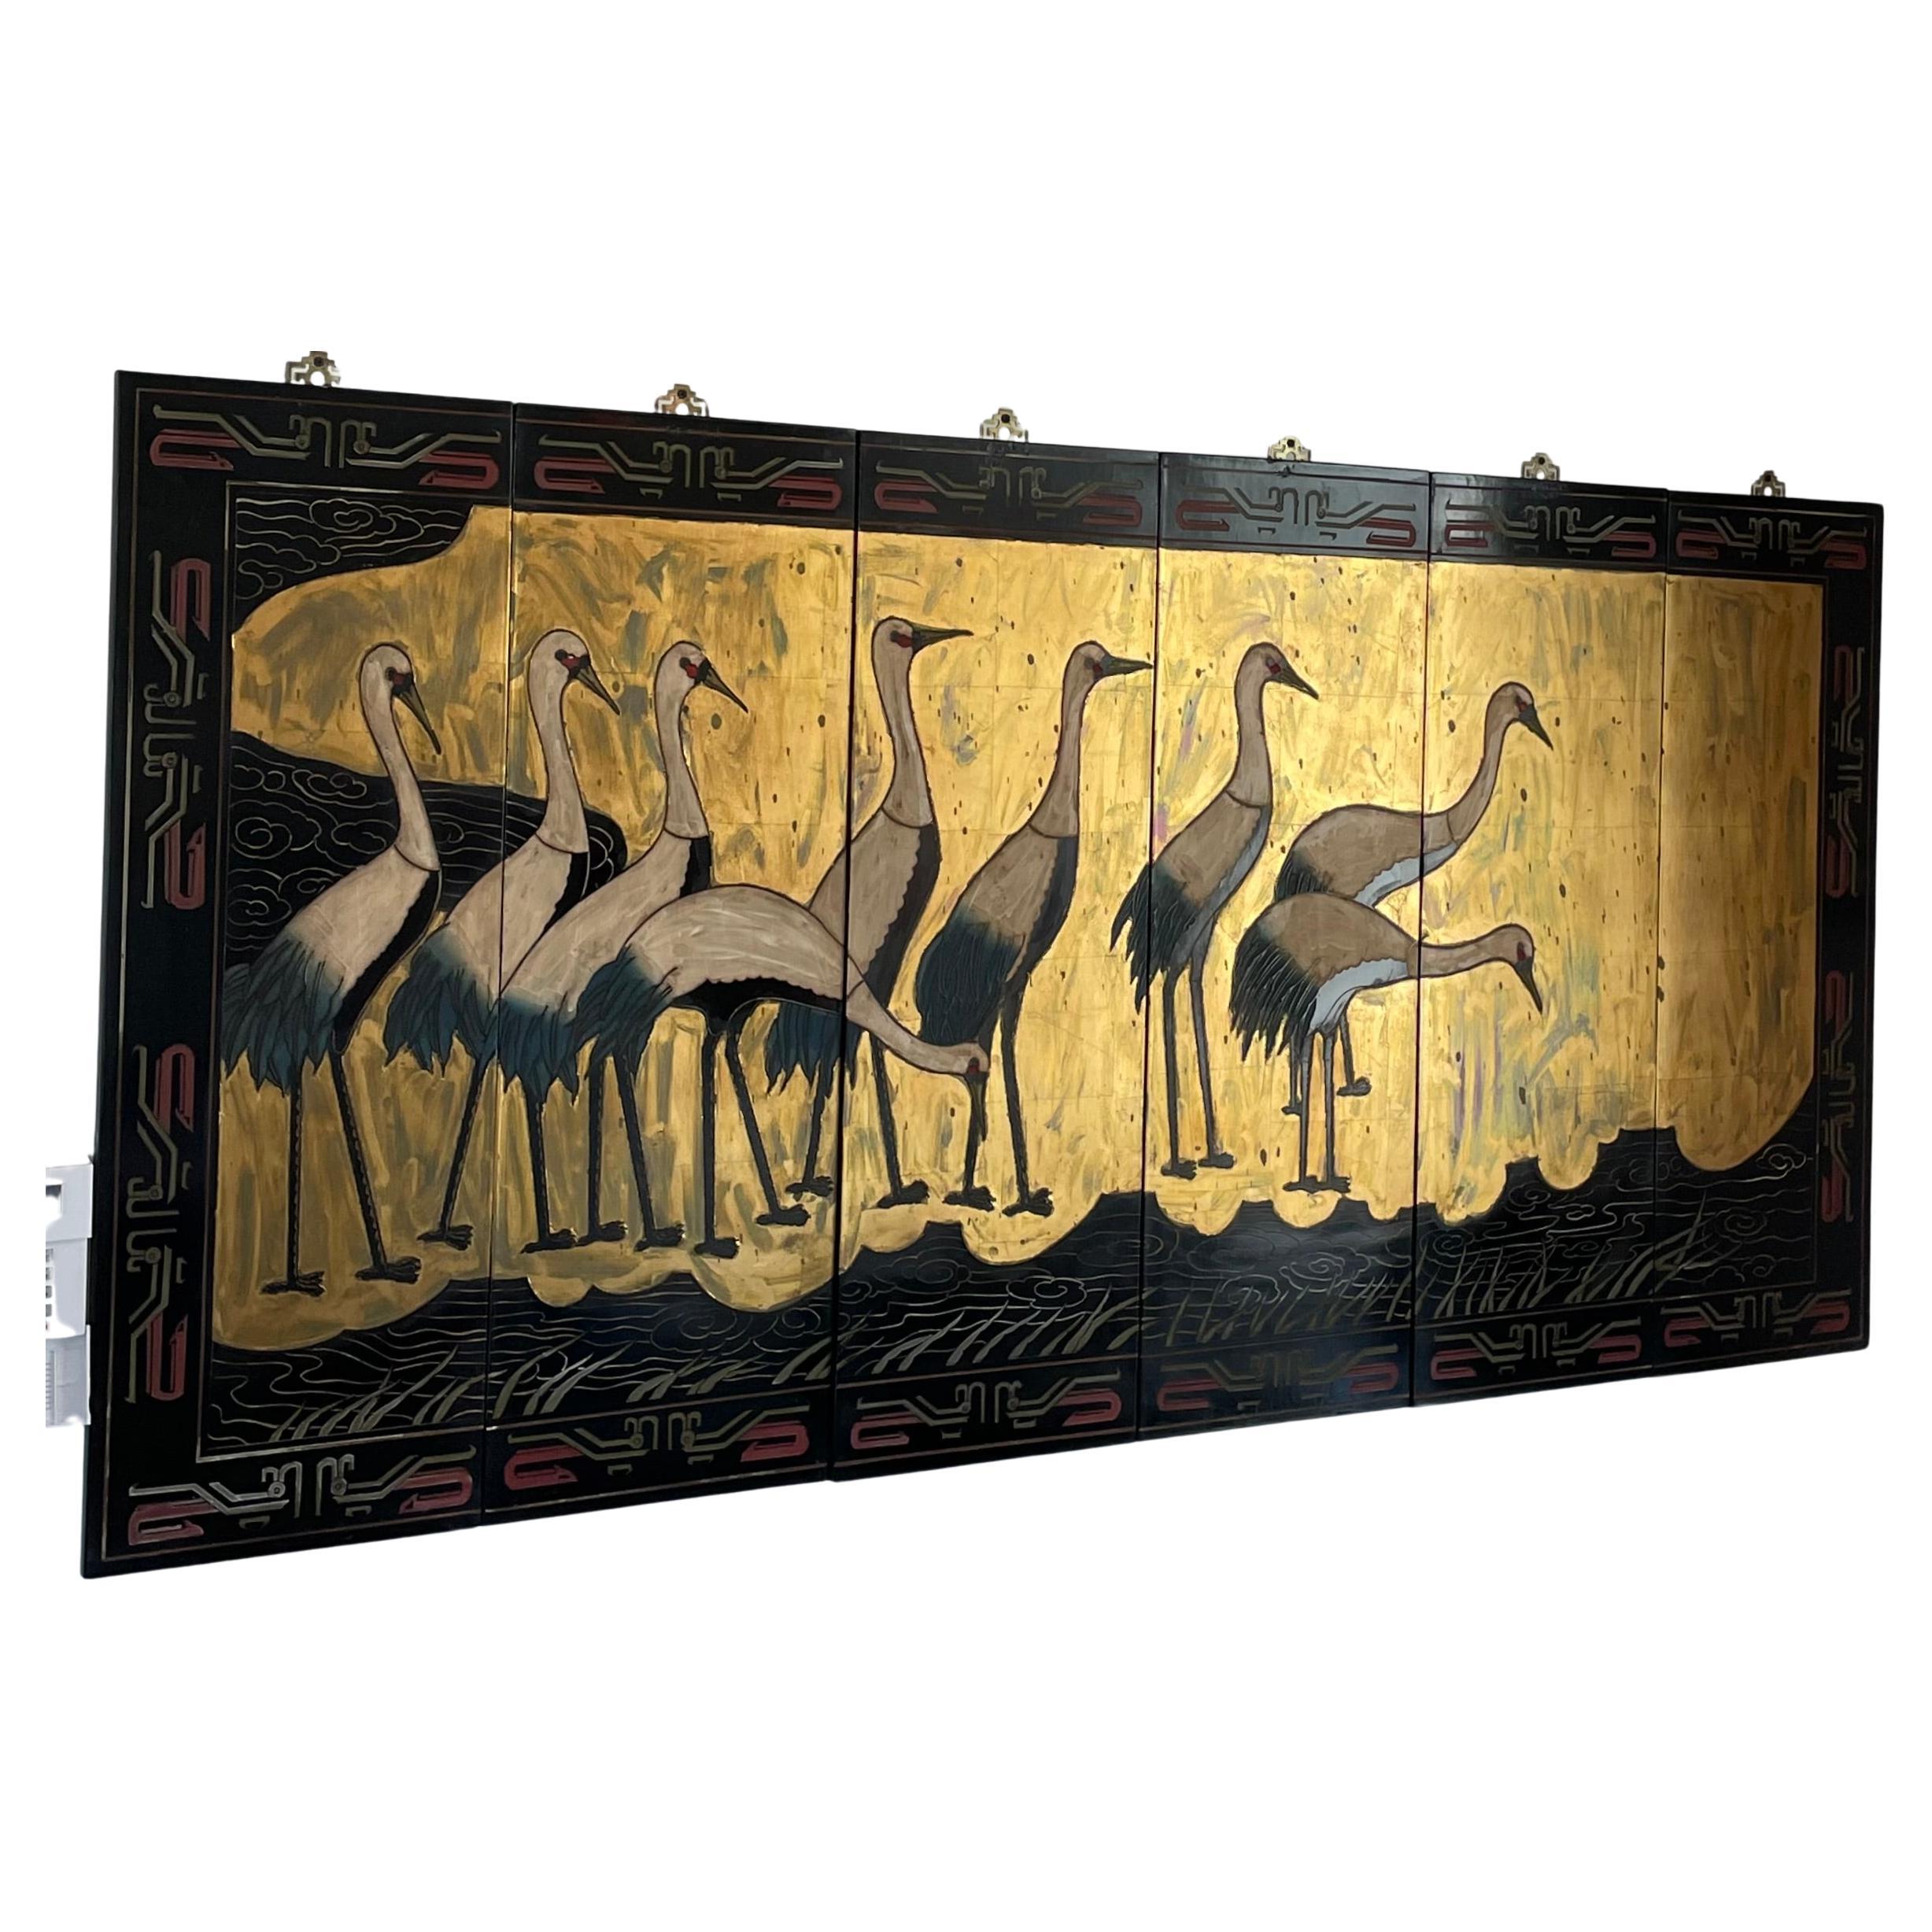 This sylish and chic six panel coromandel screed dates to the 1970s and it very much captures the Hollywood Regency passion for the exotic and magical. 

Note: Overall width with all of the panels combined is 72